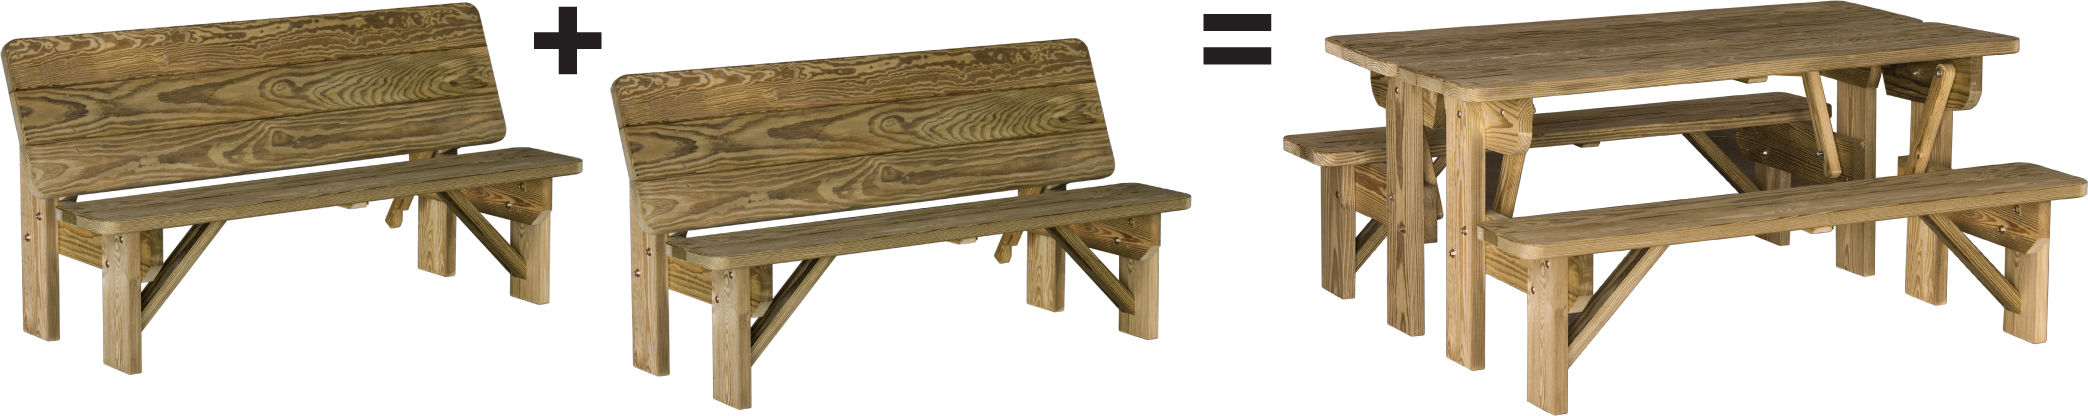 Bench-Table-Combos.jpg